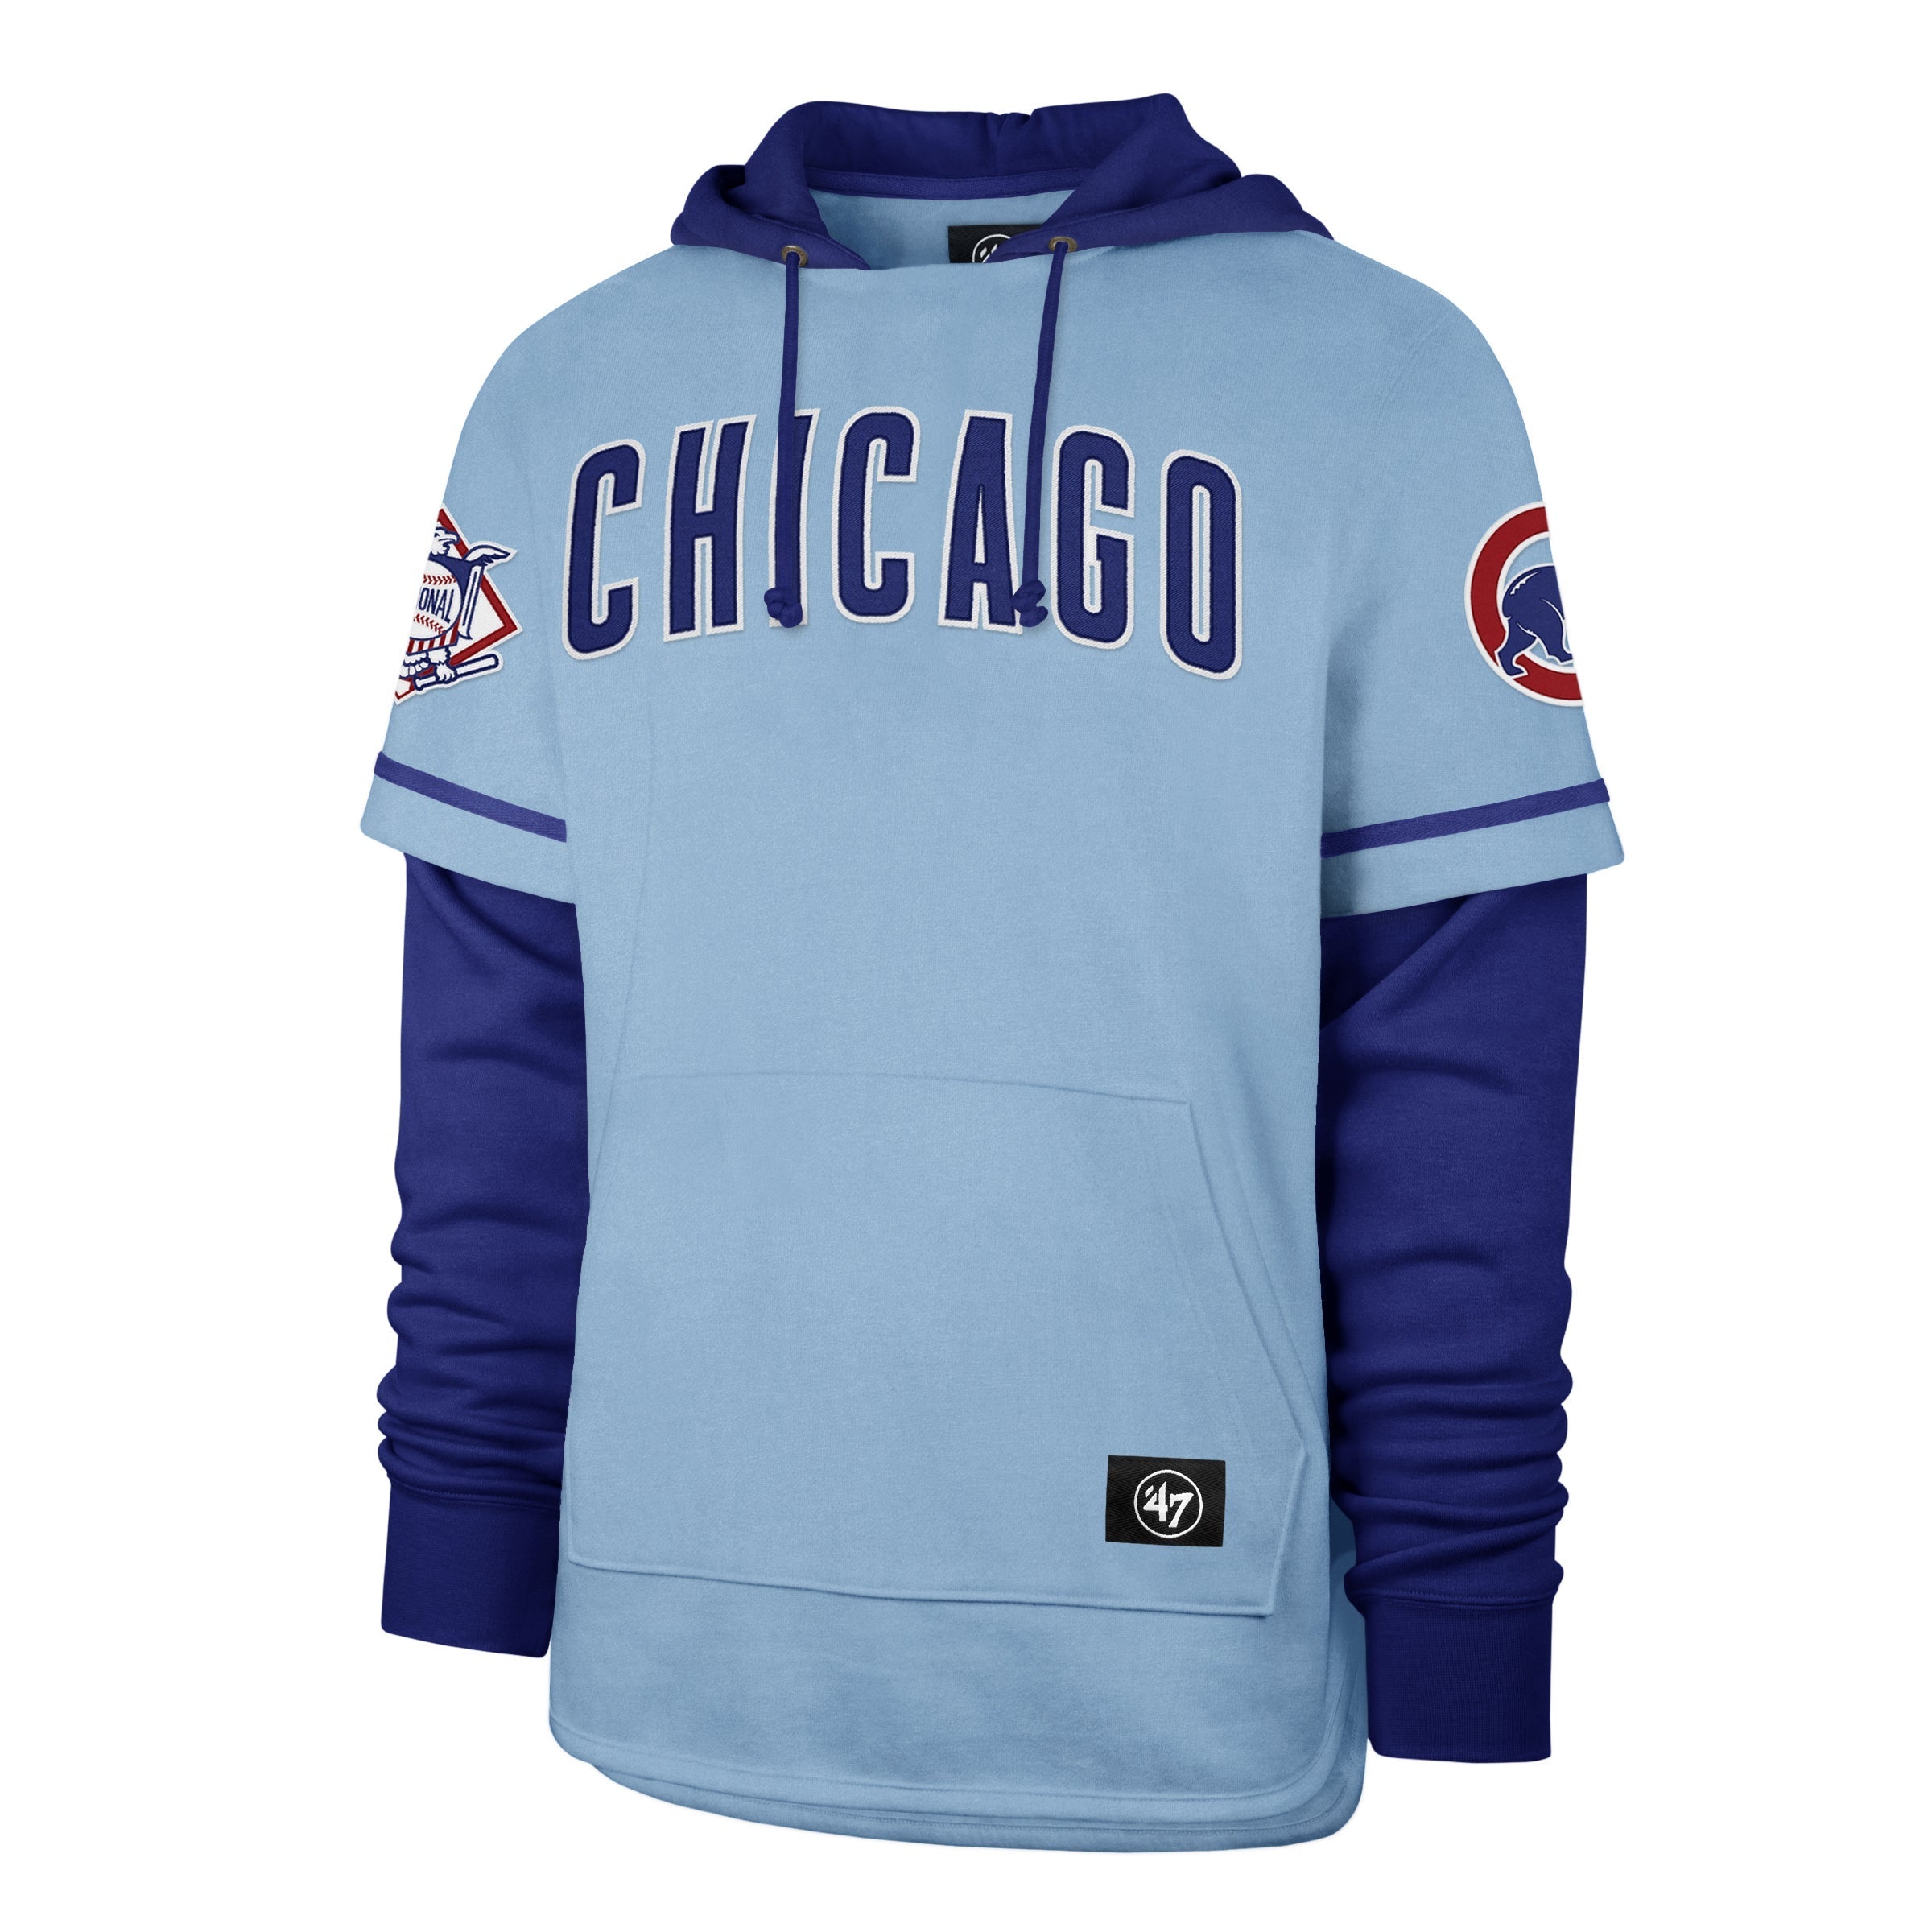 Christopher Morel Chicago Cubs Field of Dreams Jersey by NIKE